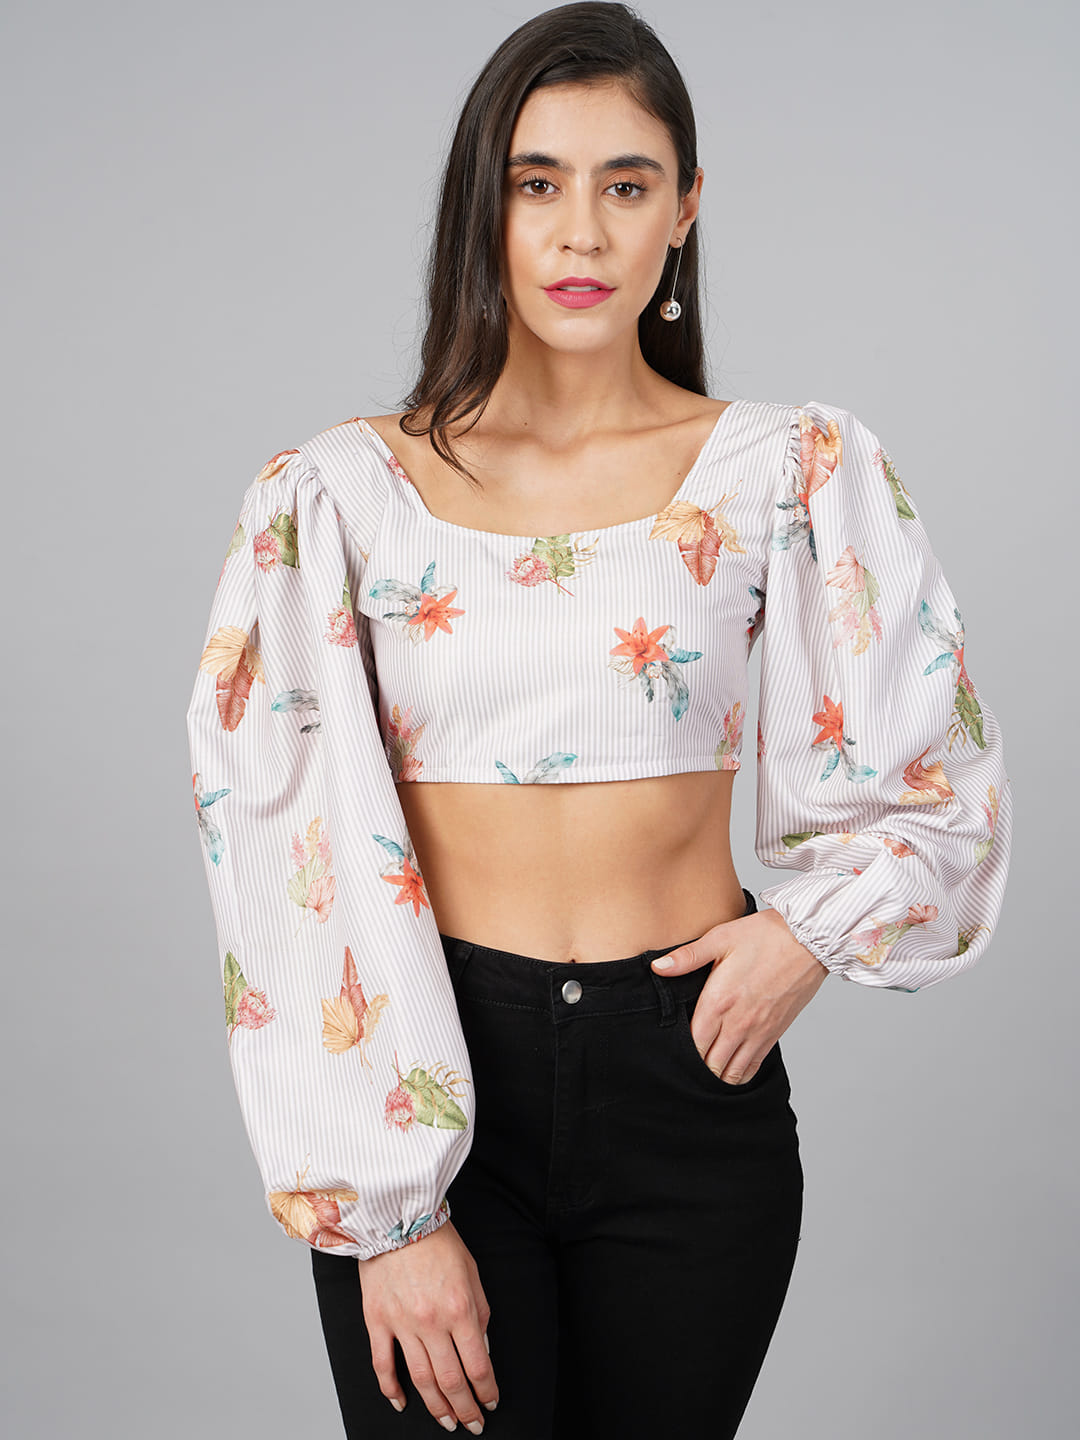 SCORPIUS Off-White Knot Top